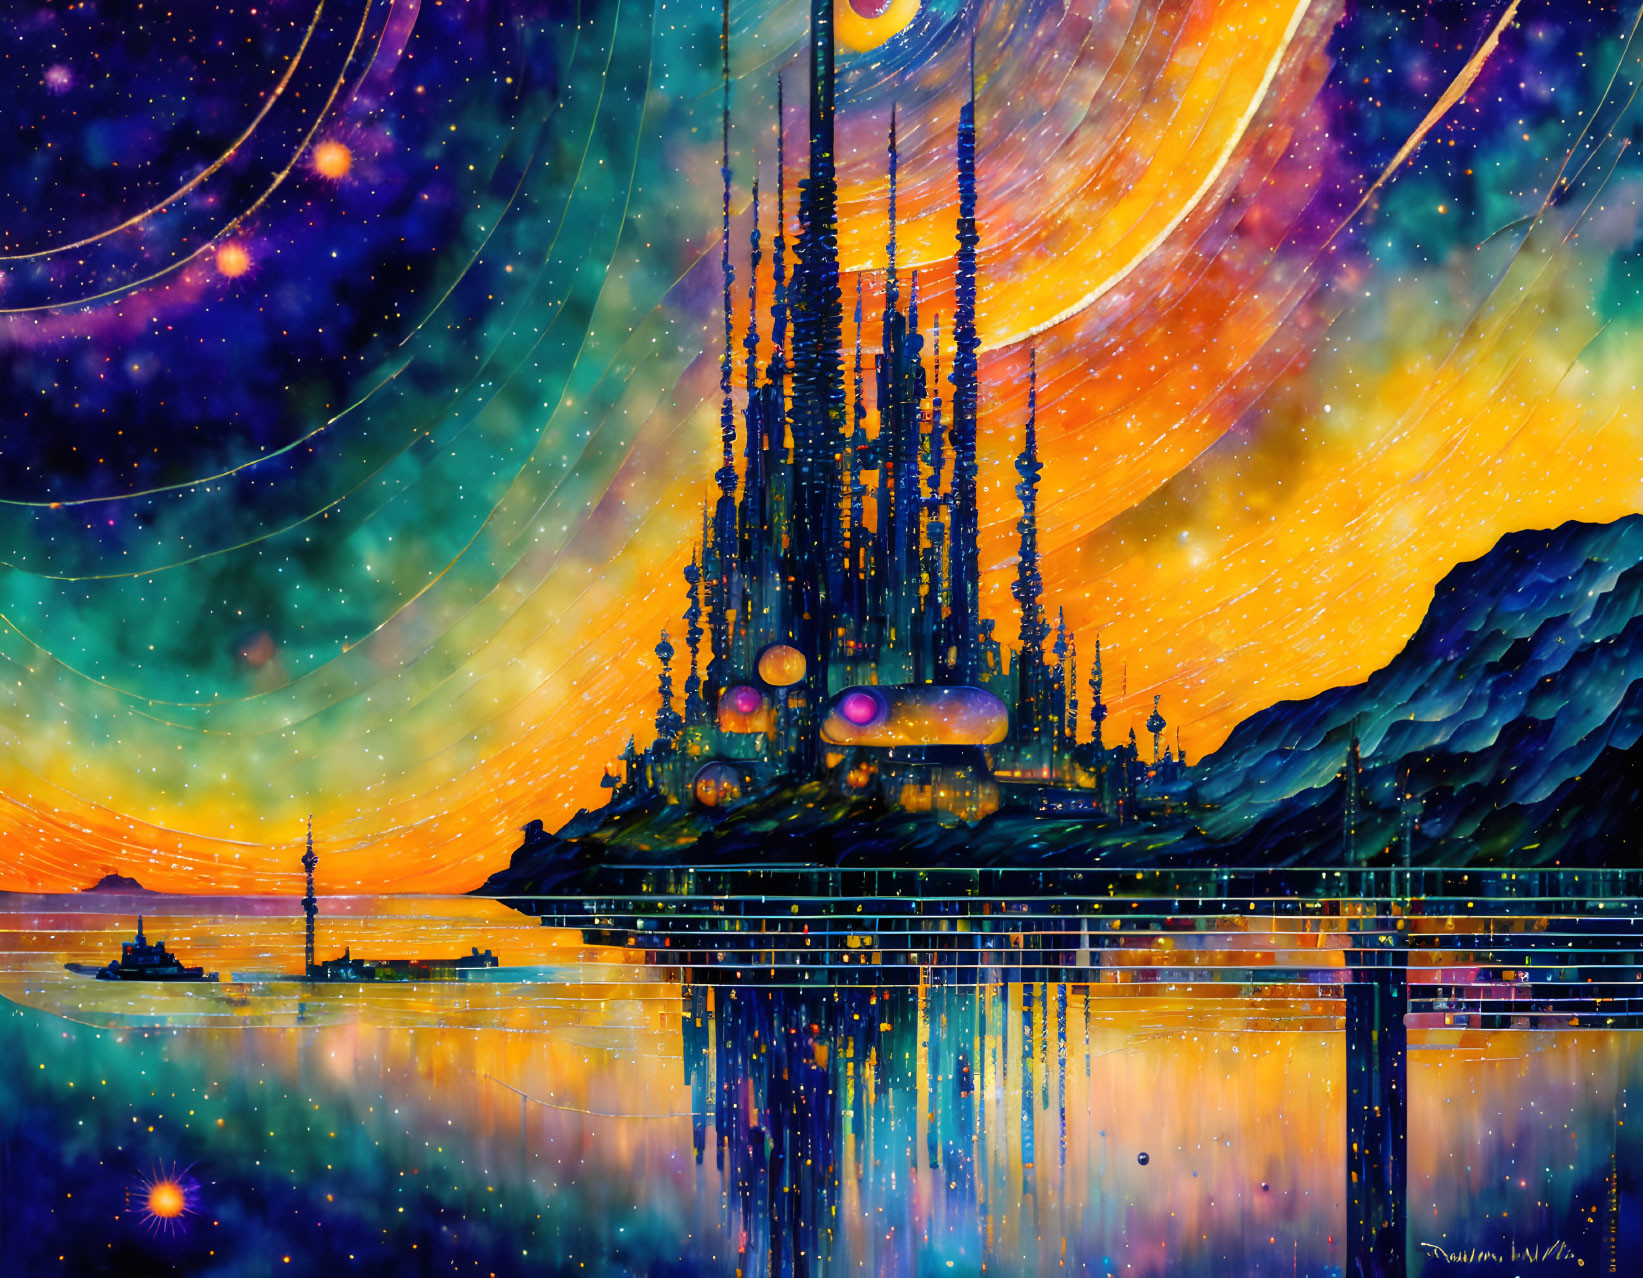 Colorful cityscape with tall spires under starry sky and celestial reflection.